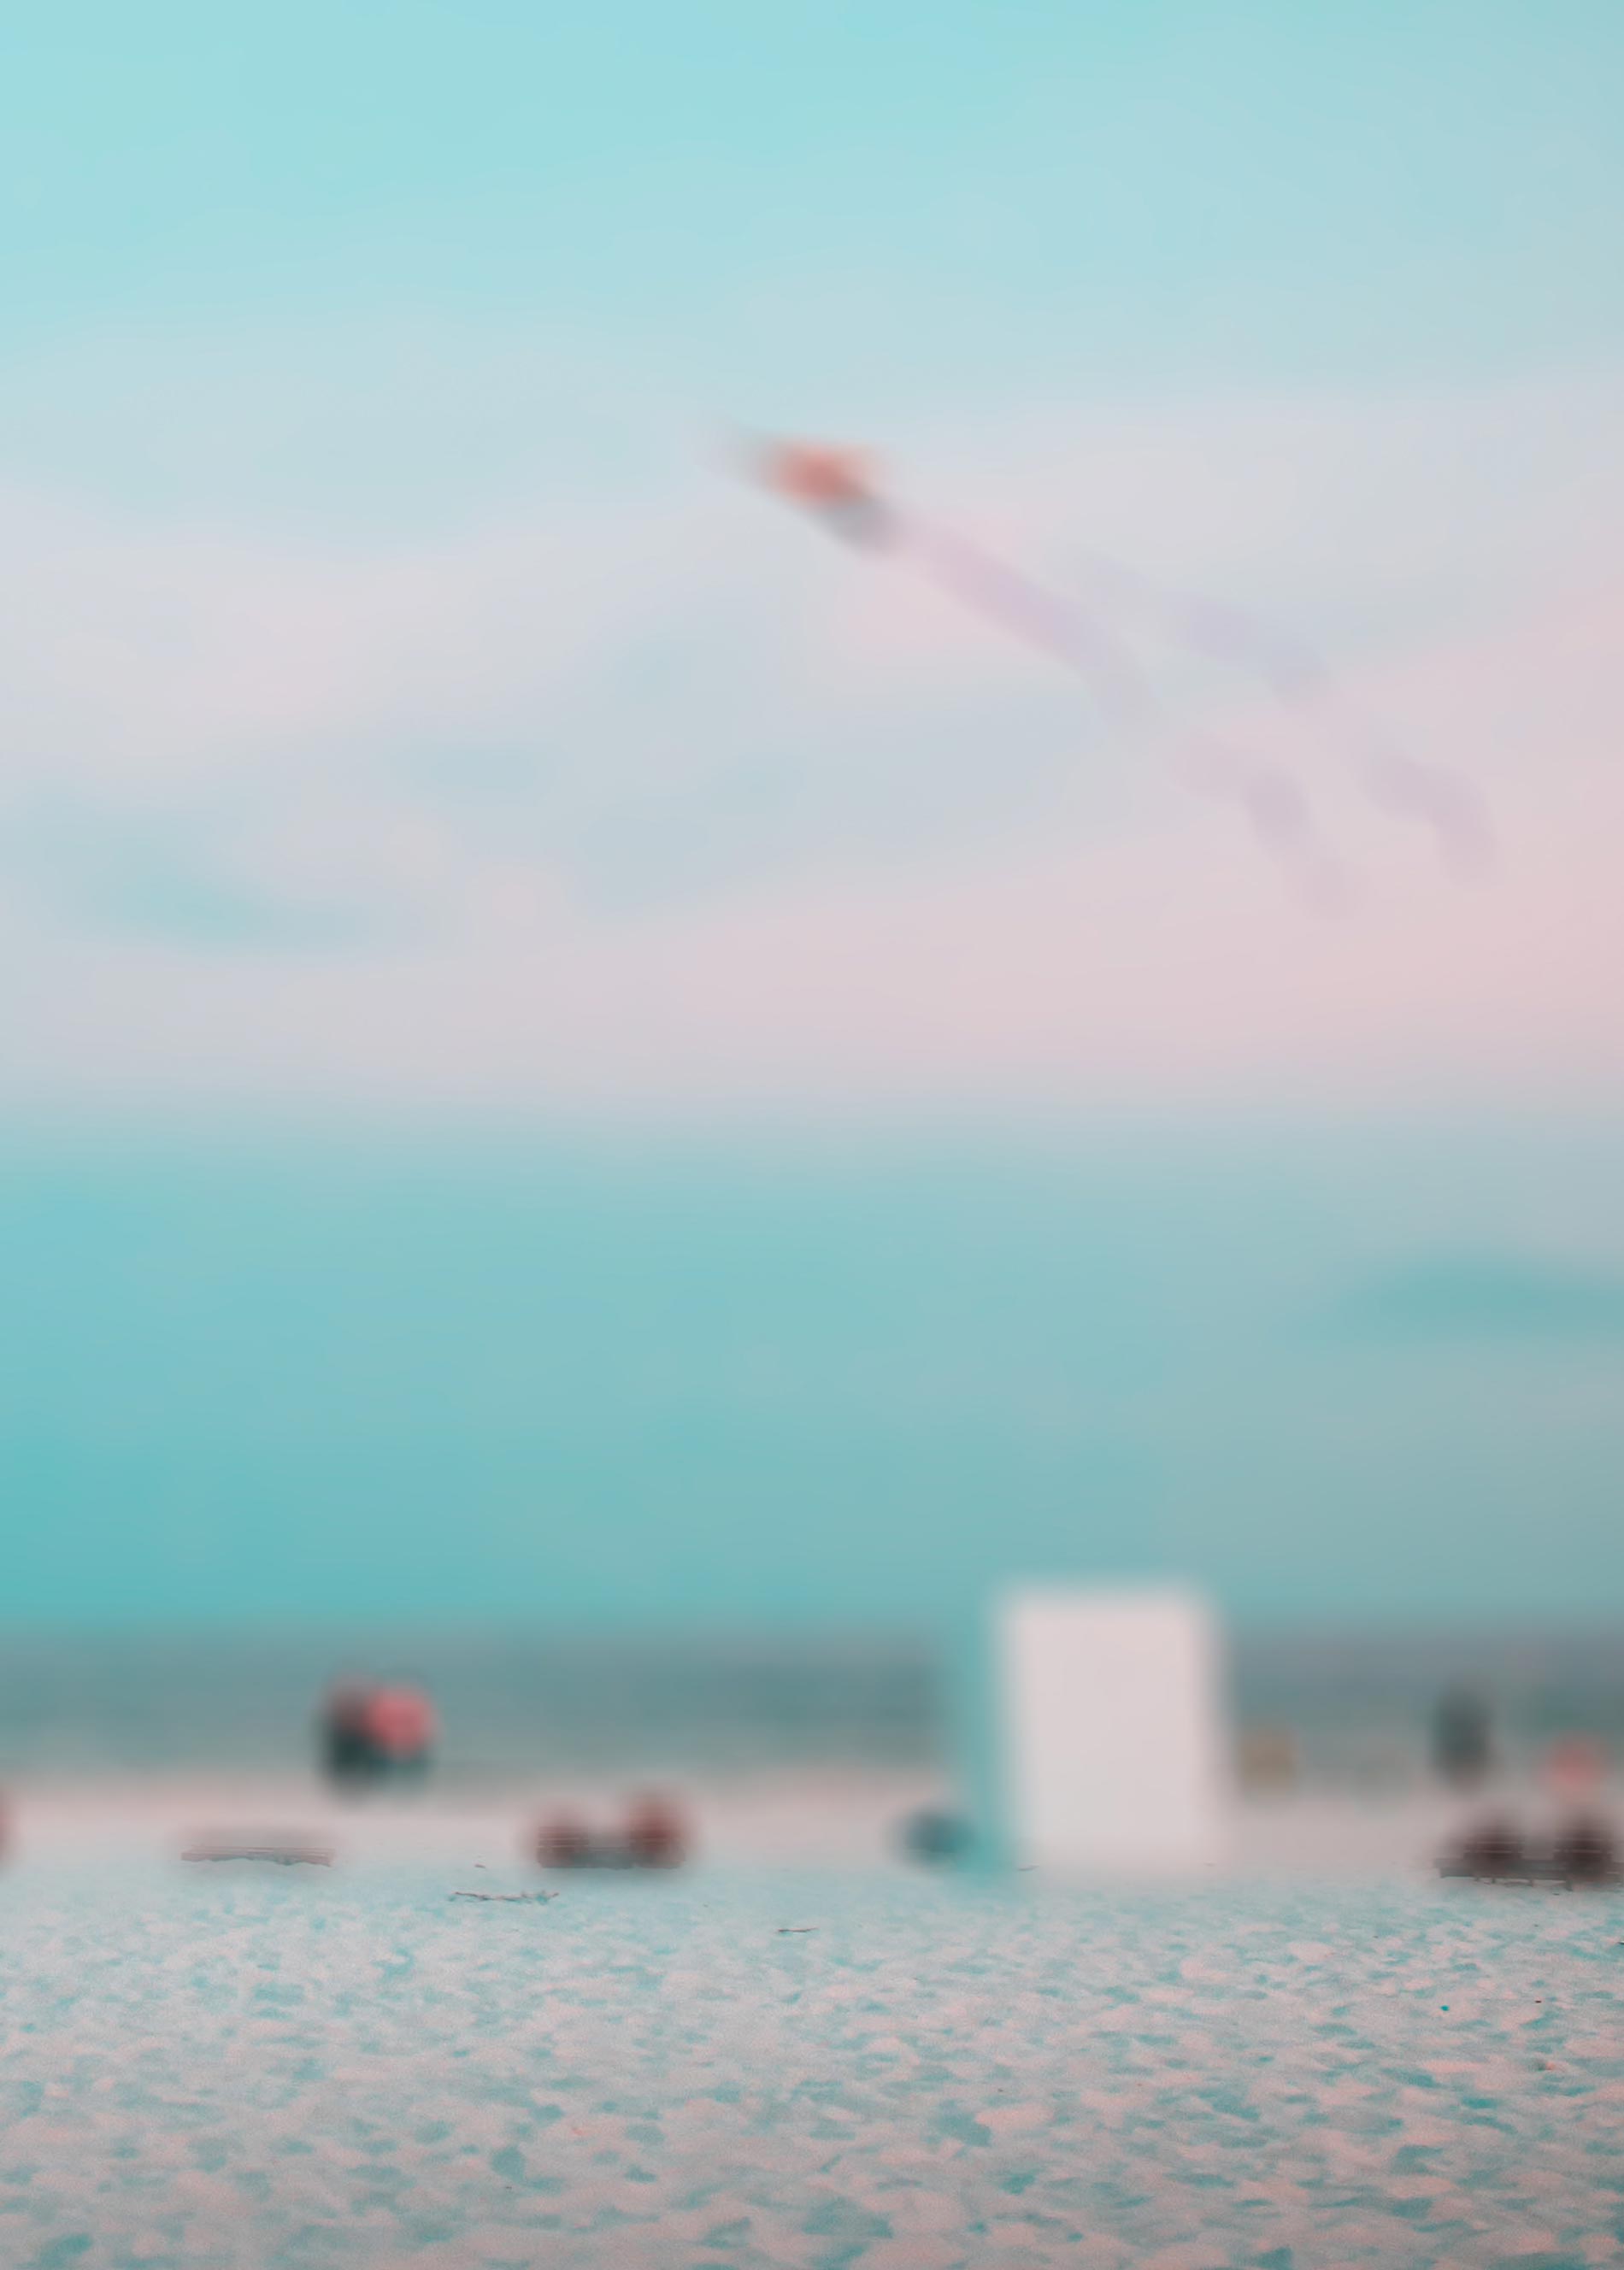 Sky Blur Background Free Stock Image [ Download Now ]